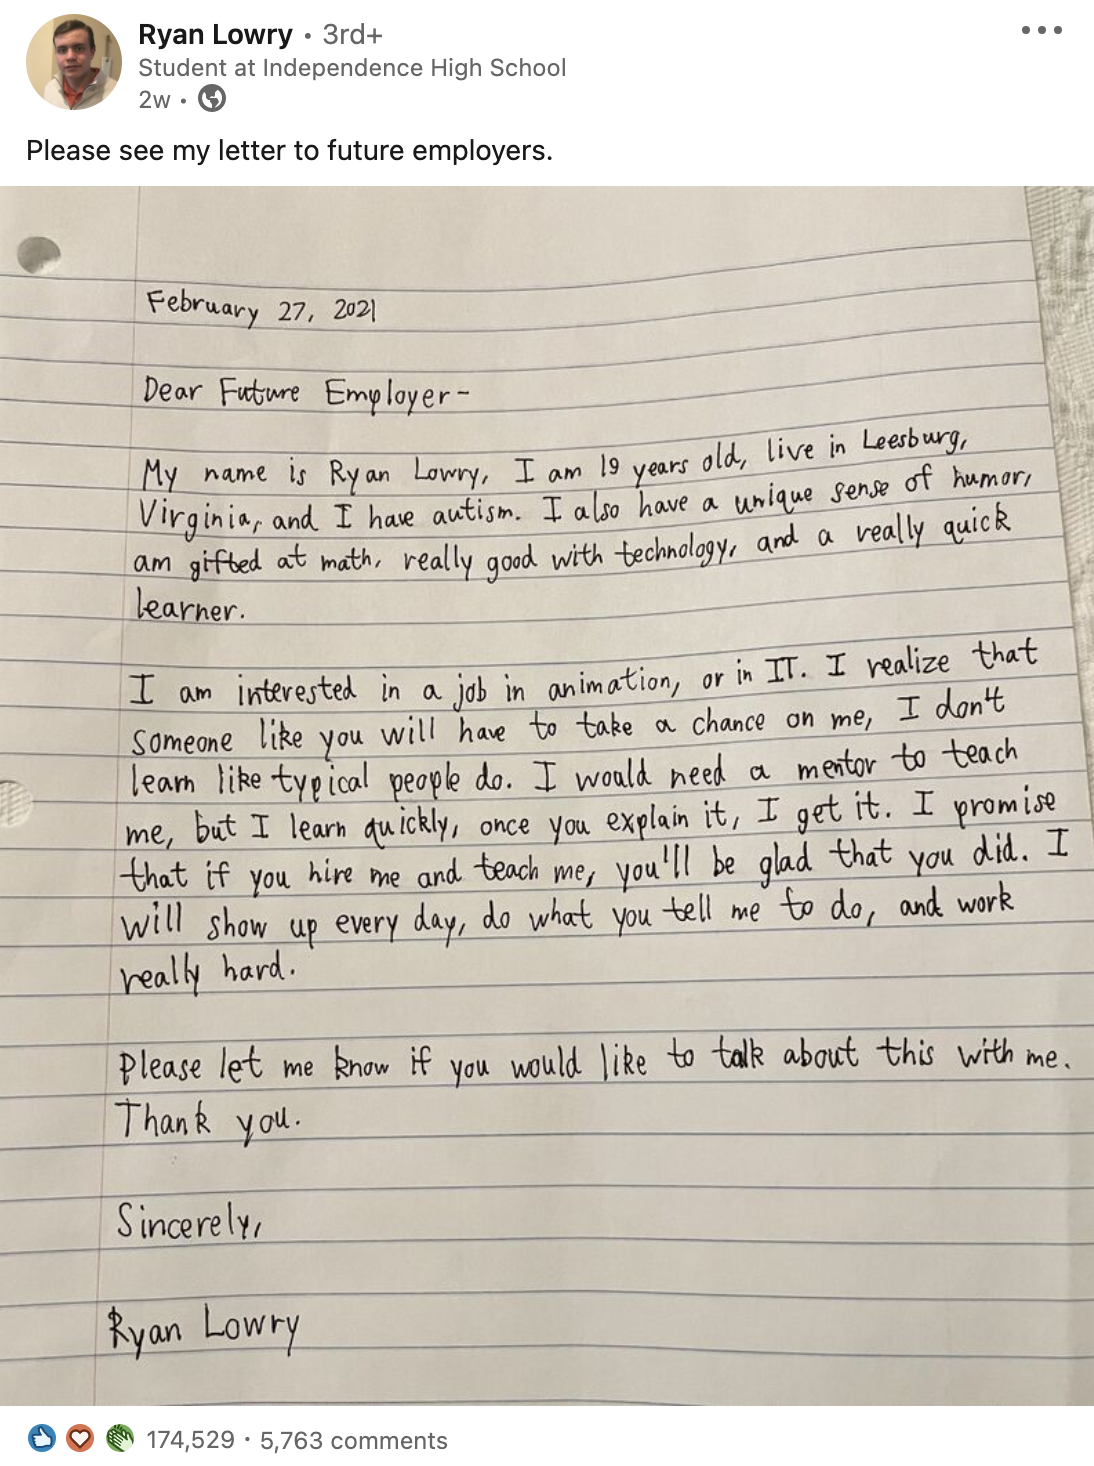 LinkedIn post from Ryan Lowry (Student at Independence High School) with 174,000+ reactions and 5,700+ comments.  Post reads: “Please see my letter to future employers.” and includes screenshot of handwritten letter:  February, 27, 2021  Dear Future Employer,  My name is Ryan Lowry, I am 19 years old, live in Leesburg, Virginia, and I have autism. I also have a unique sense of humor, am gifted at math, really good with technology, and a really quick learner.  I am interested in a job in animation, or in IT. I realize that someone like you will have to take a chance on me, I don’t learn like typical people do. I would need a mentor to teach me, but I learn quickly, once you explain it, I get it. I promise that if you hire me and teach me, you’ll be glad that you did. I will show up every day, do what you tell me to do, and work really hard.  Please let me know if you would like to talk about this with me. Thank you.  Sincerely,  Ryan Lowry